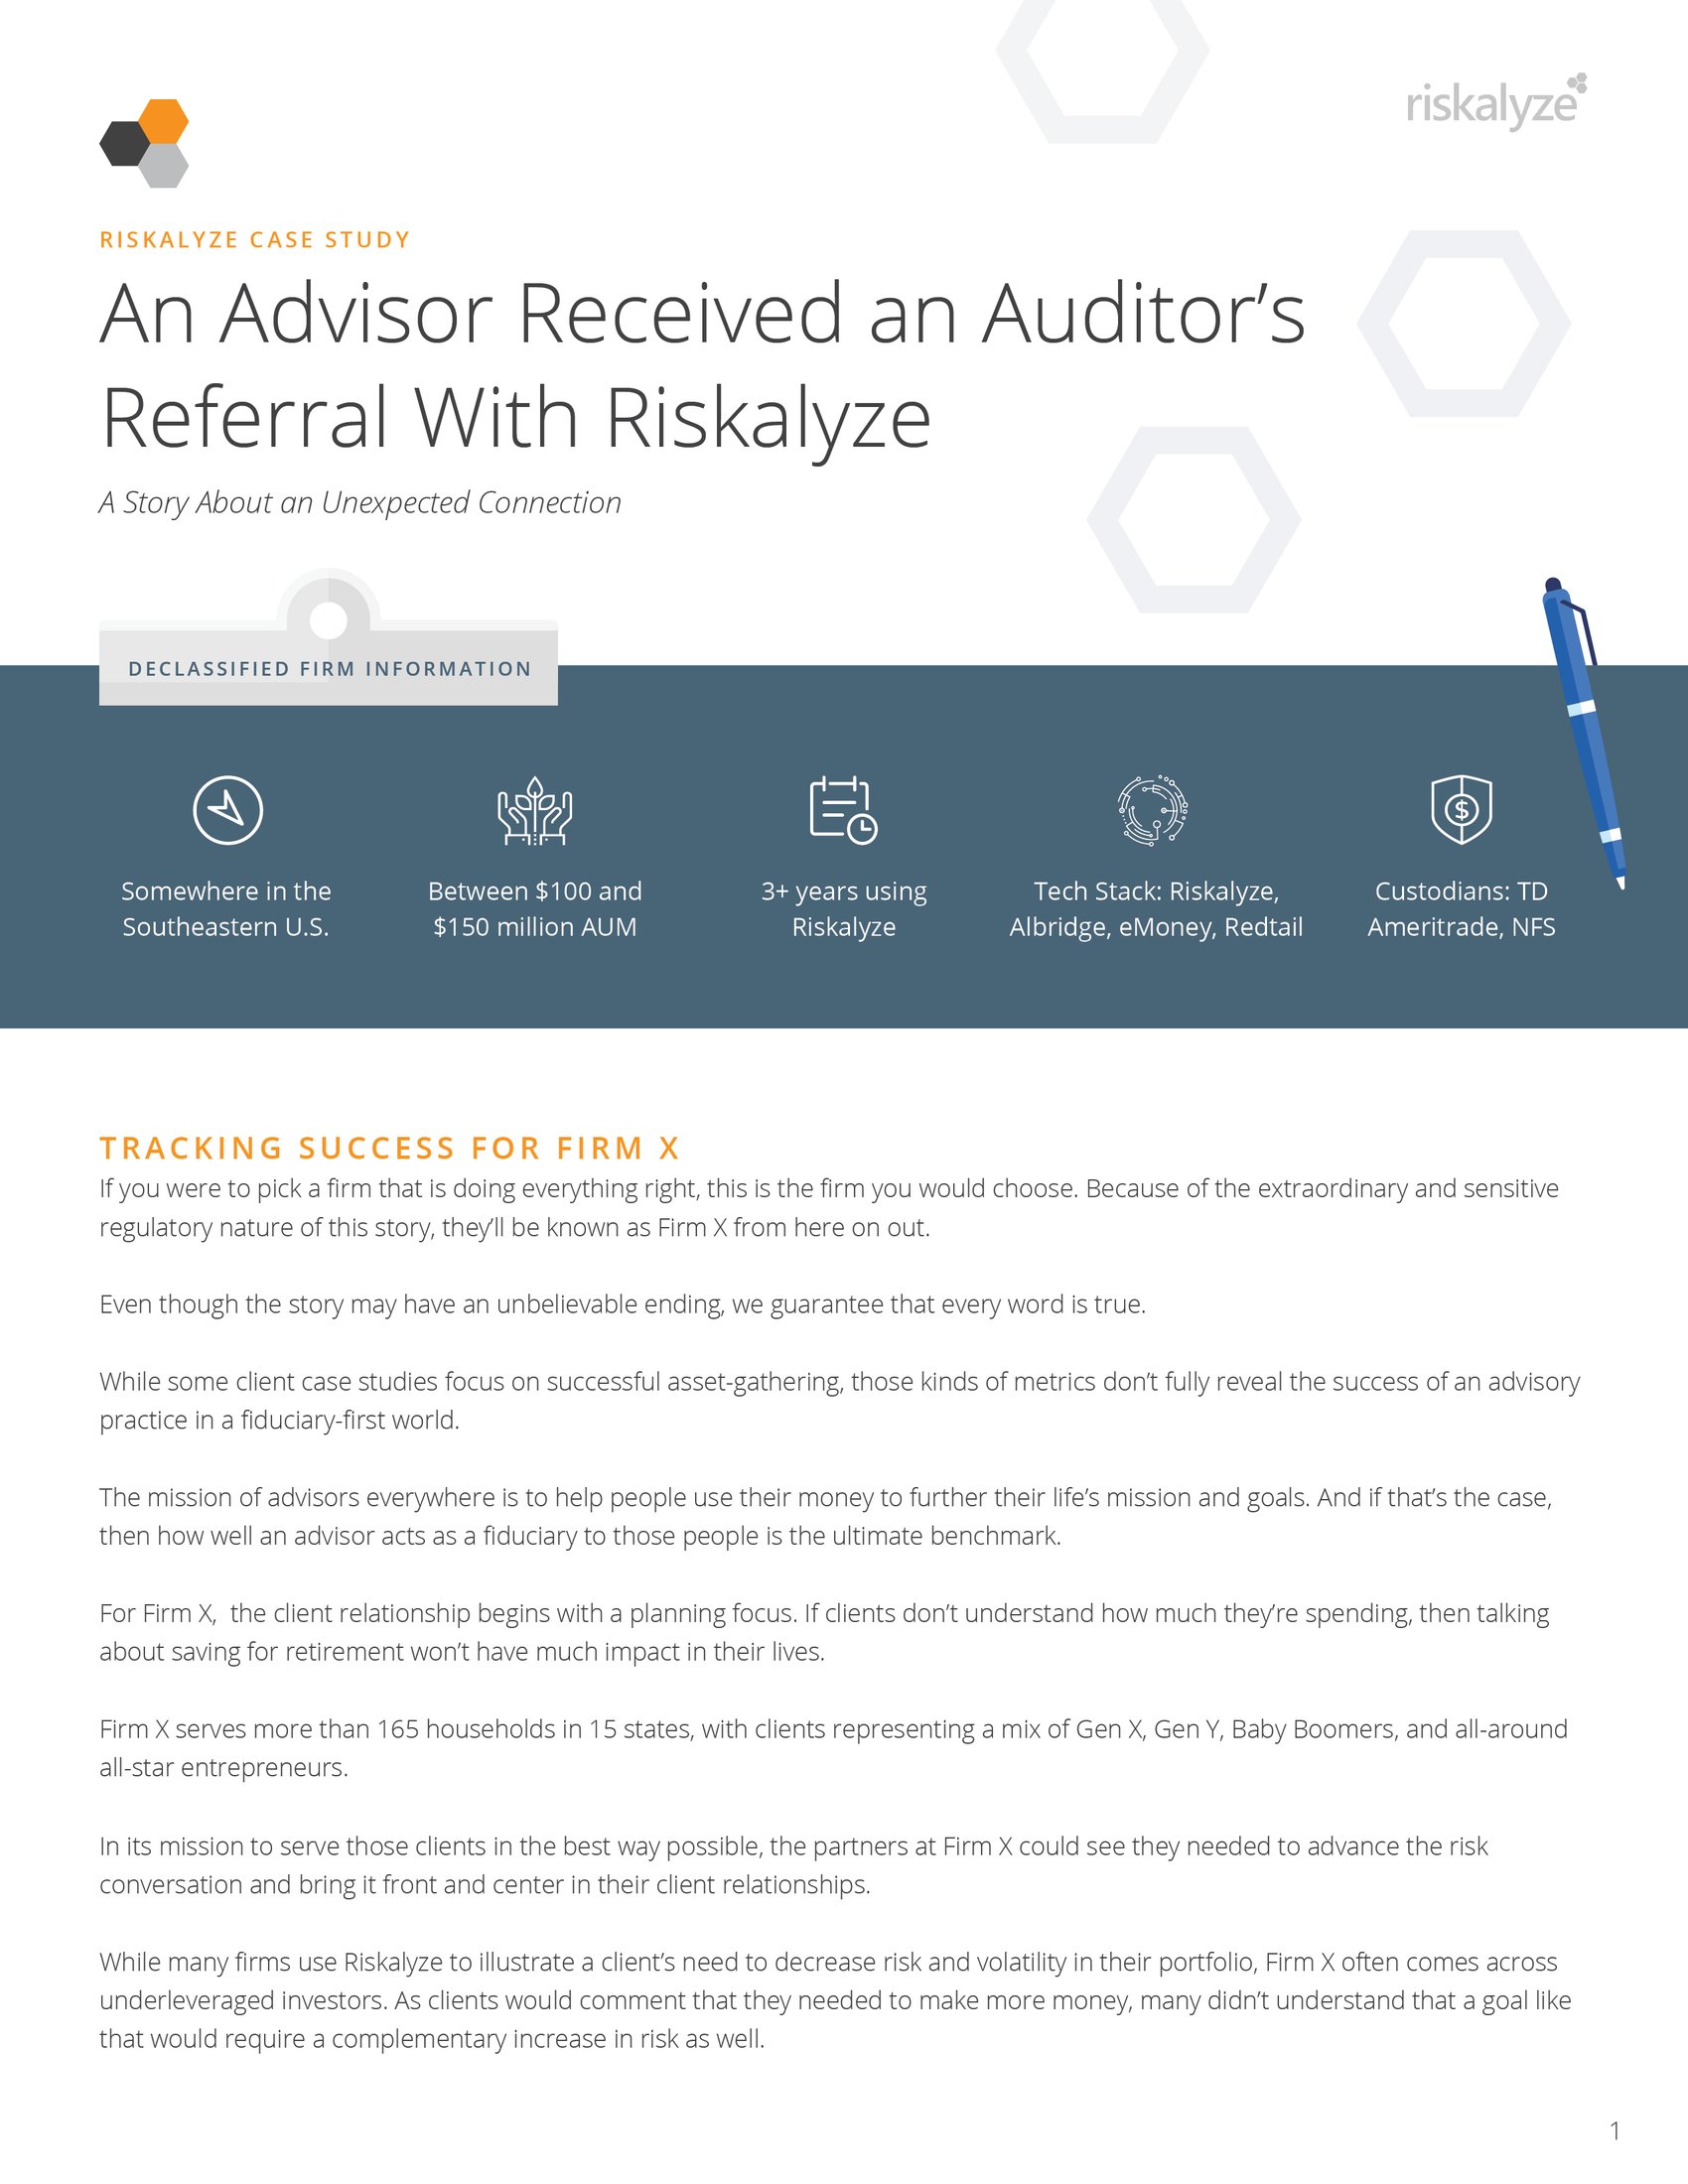 The_Auditor_and_the_Referral_Page_1